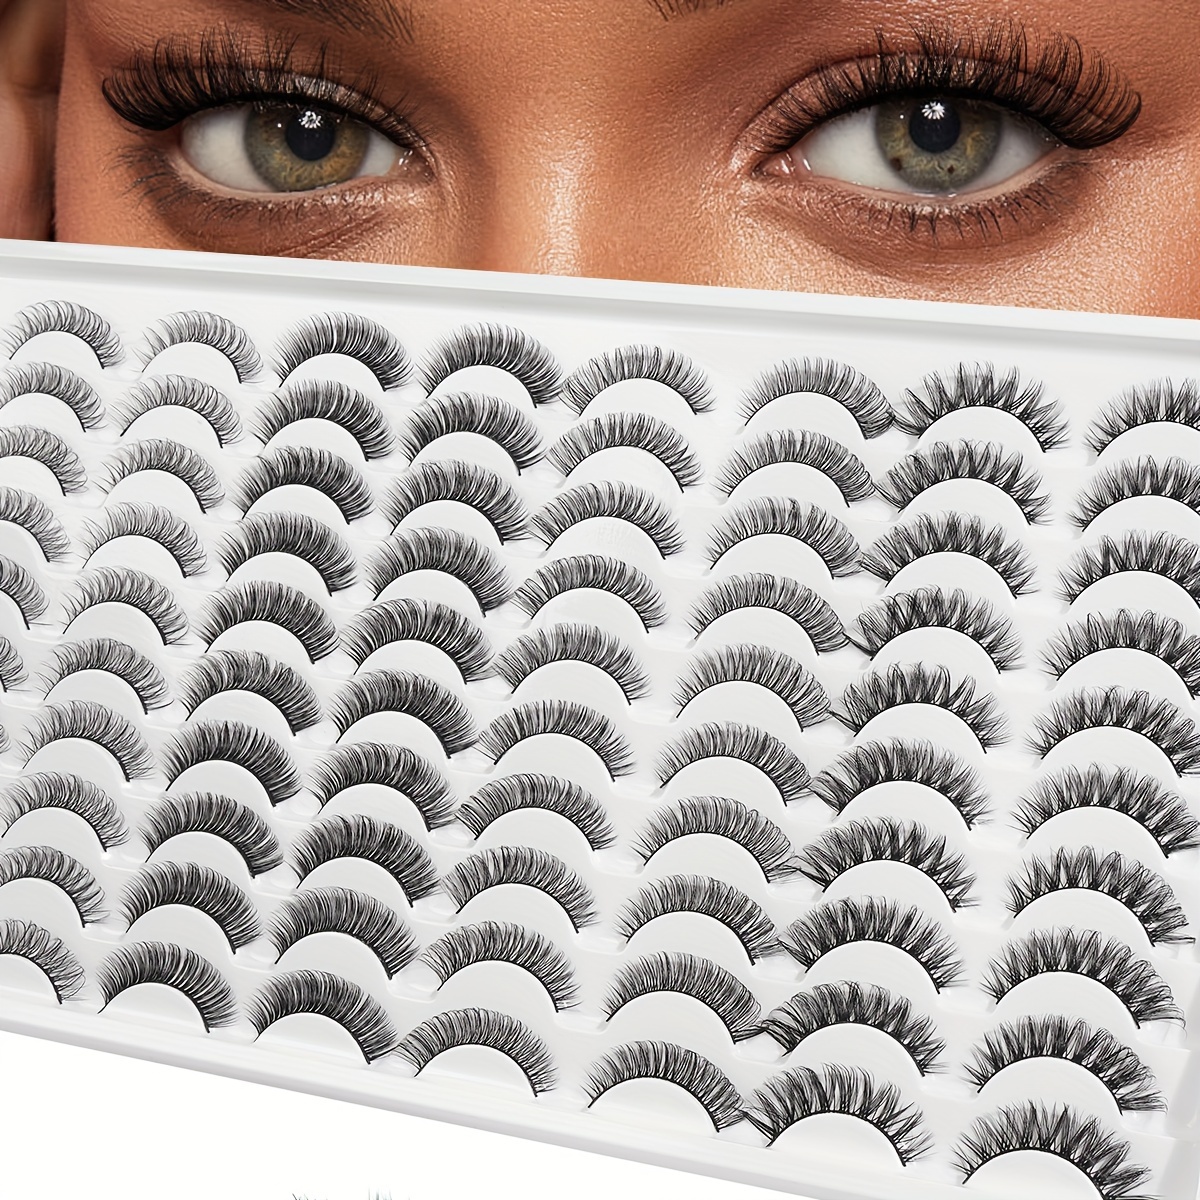 

40 Pairs Mixed Style False Eyelashes Natural Long Criss Cross Curling Fluffy Lashes Handmade Natural Faux Mink Lashes Extension